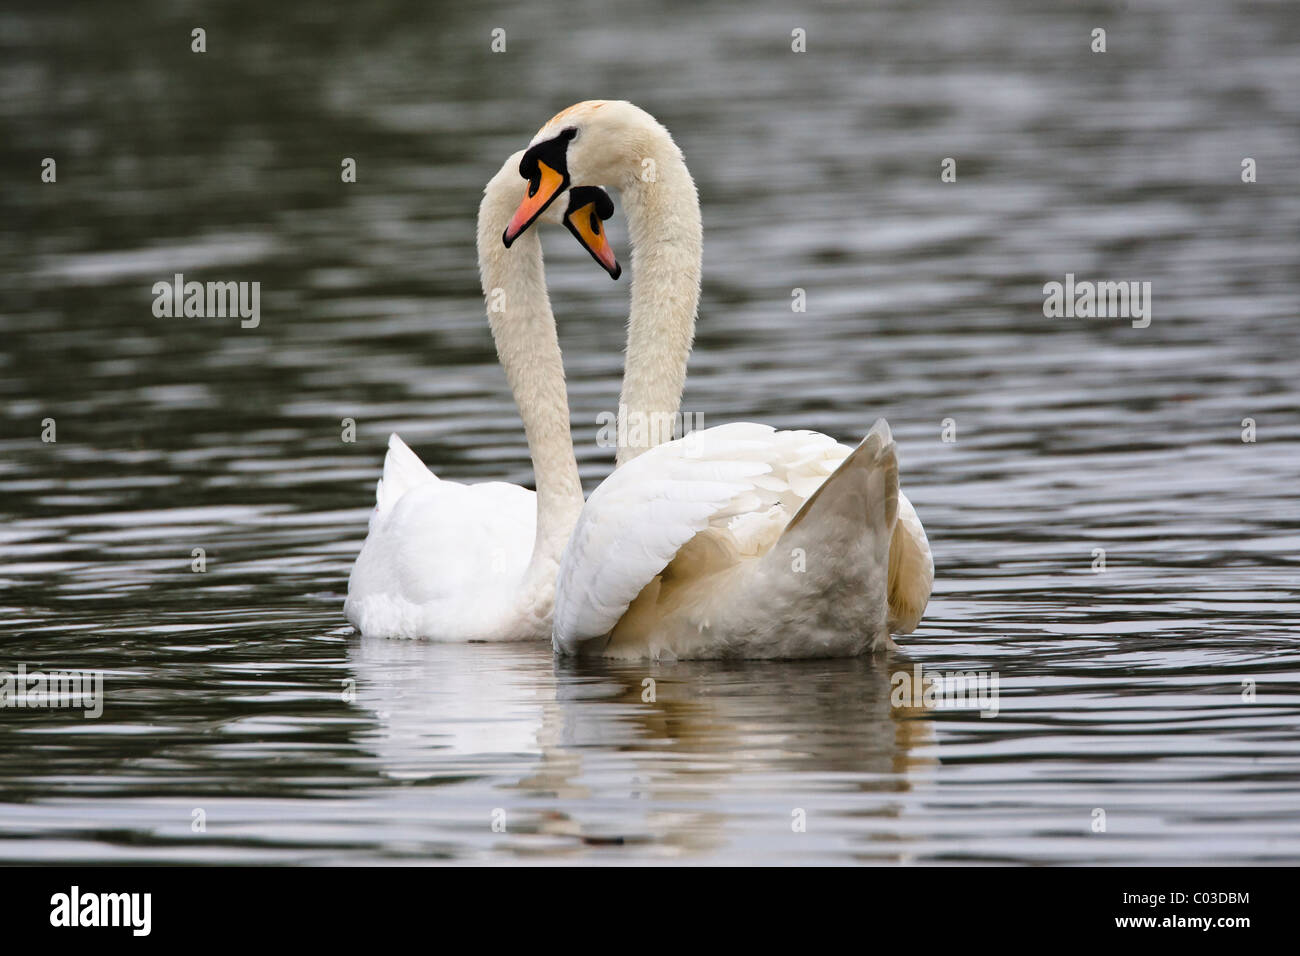 Mute swans in courtship pairing with the pair forming a heart shape Stock Photo